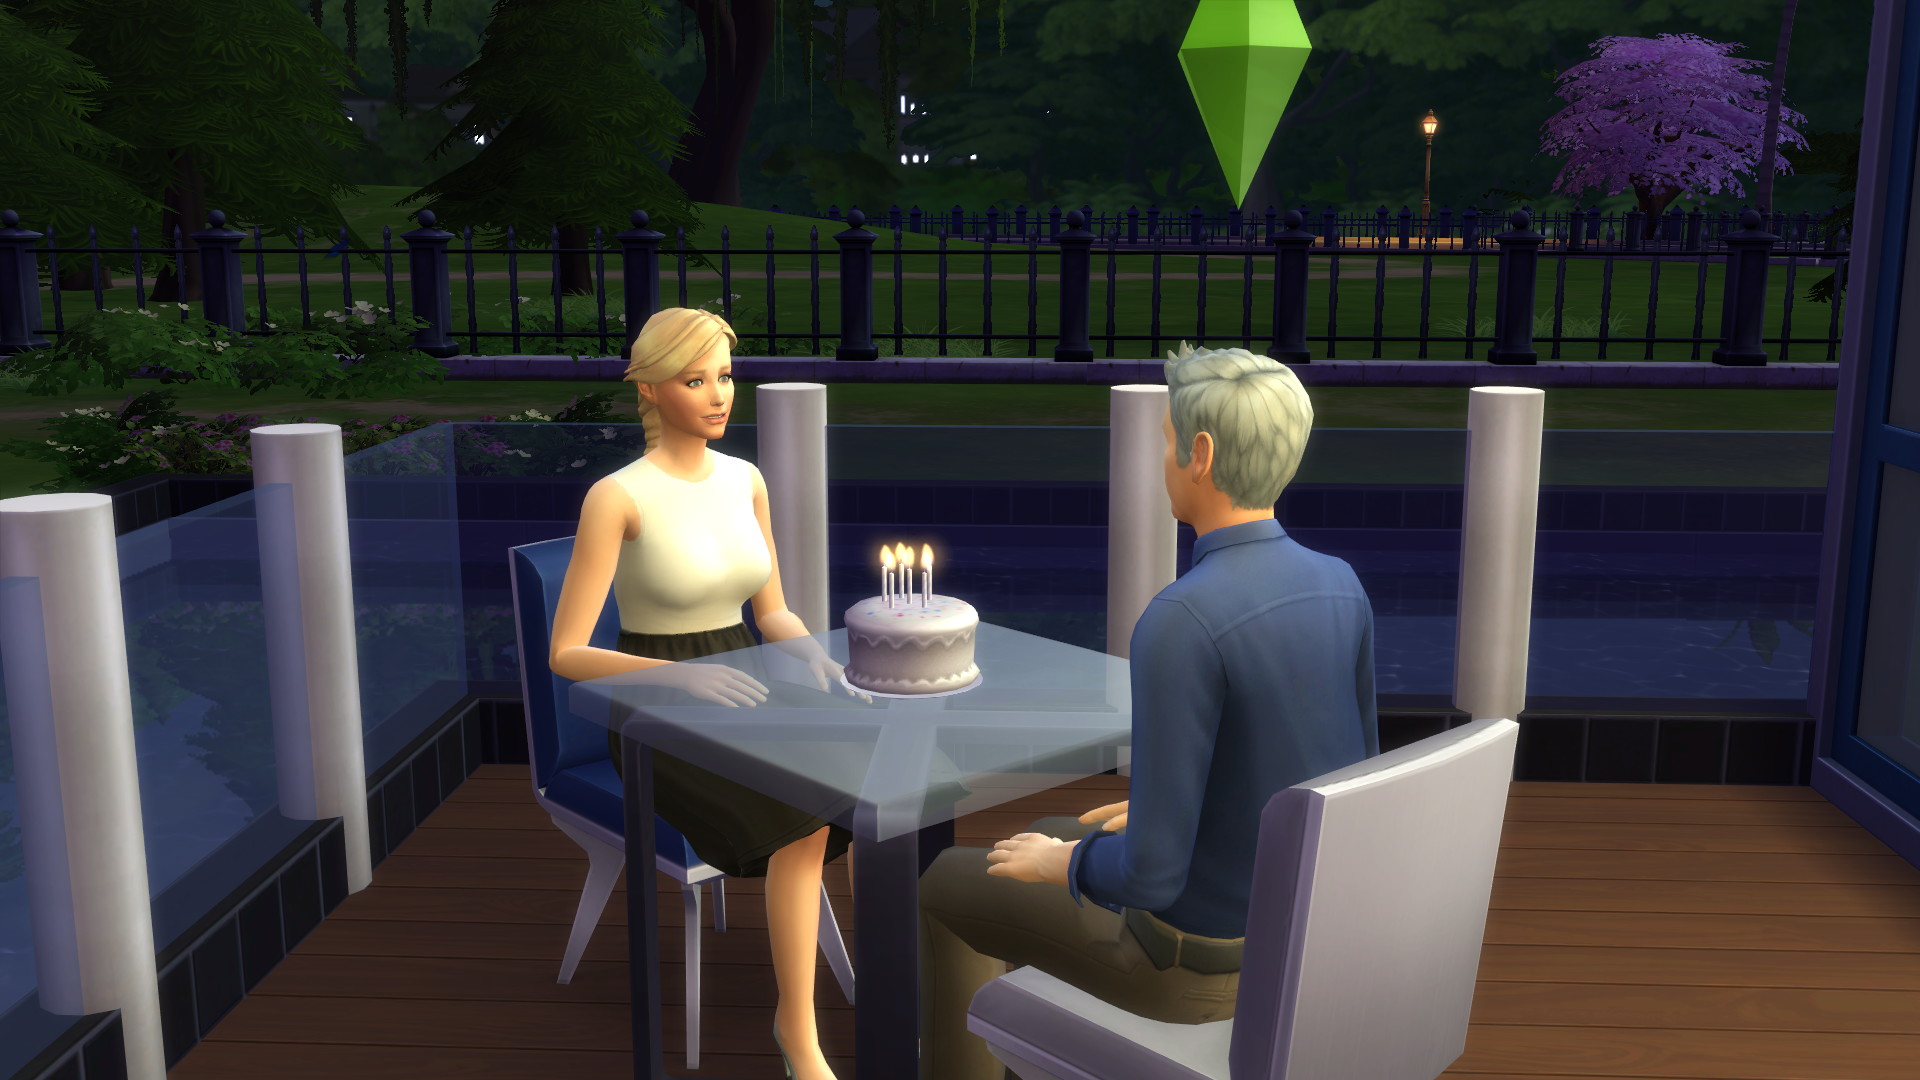 The Sims 4: Dine Out - screenshot 4